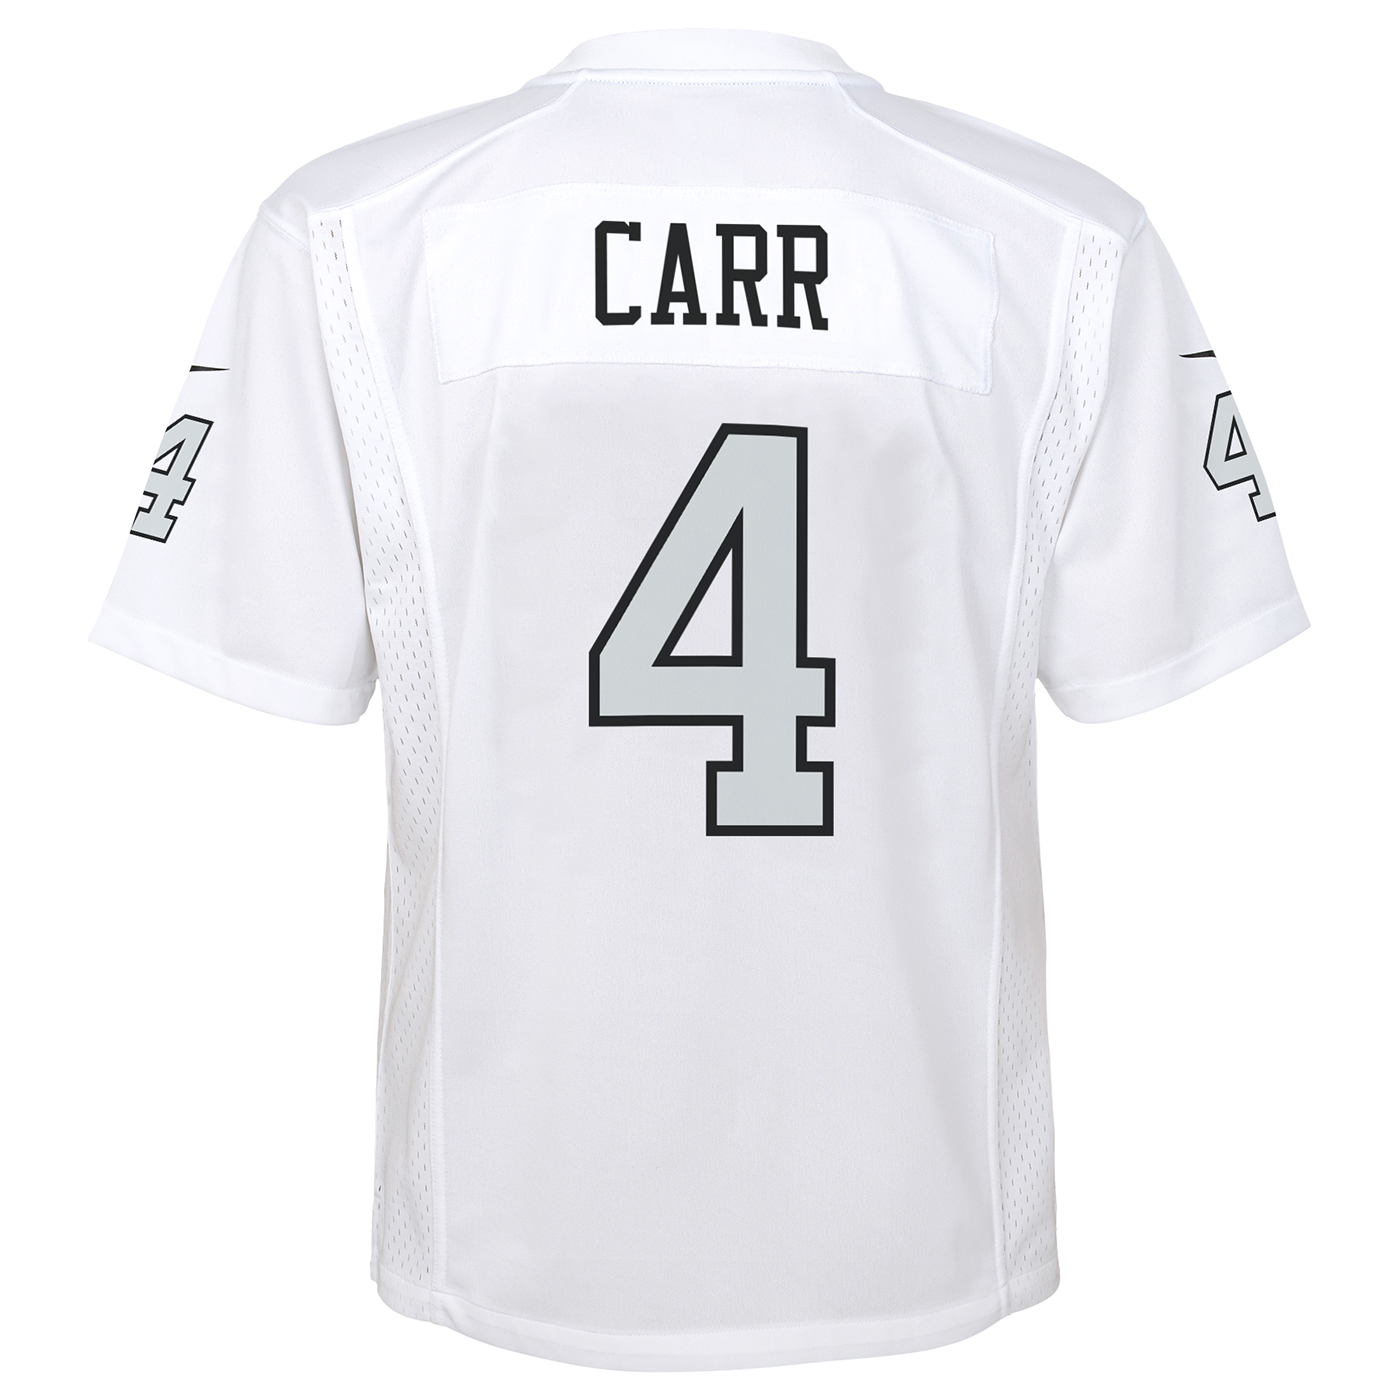 carr jersey youth